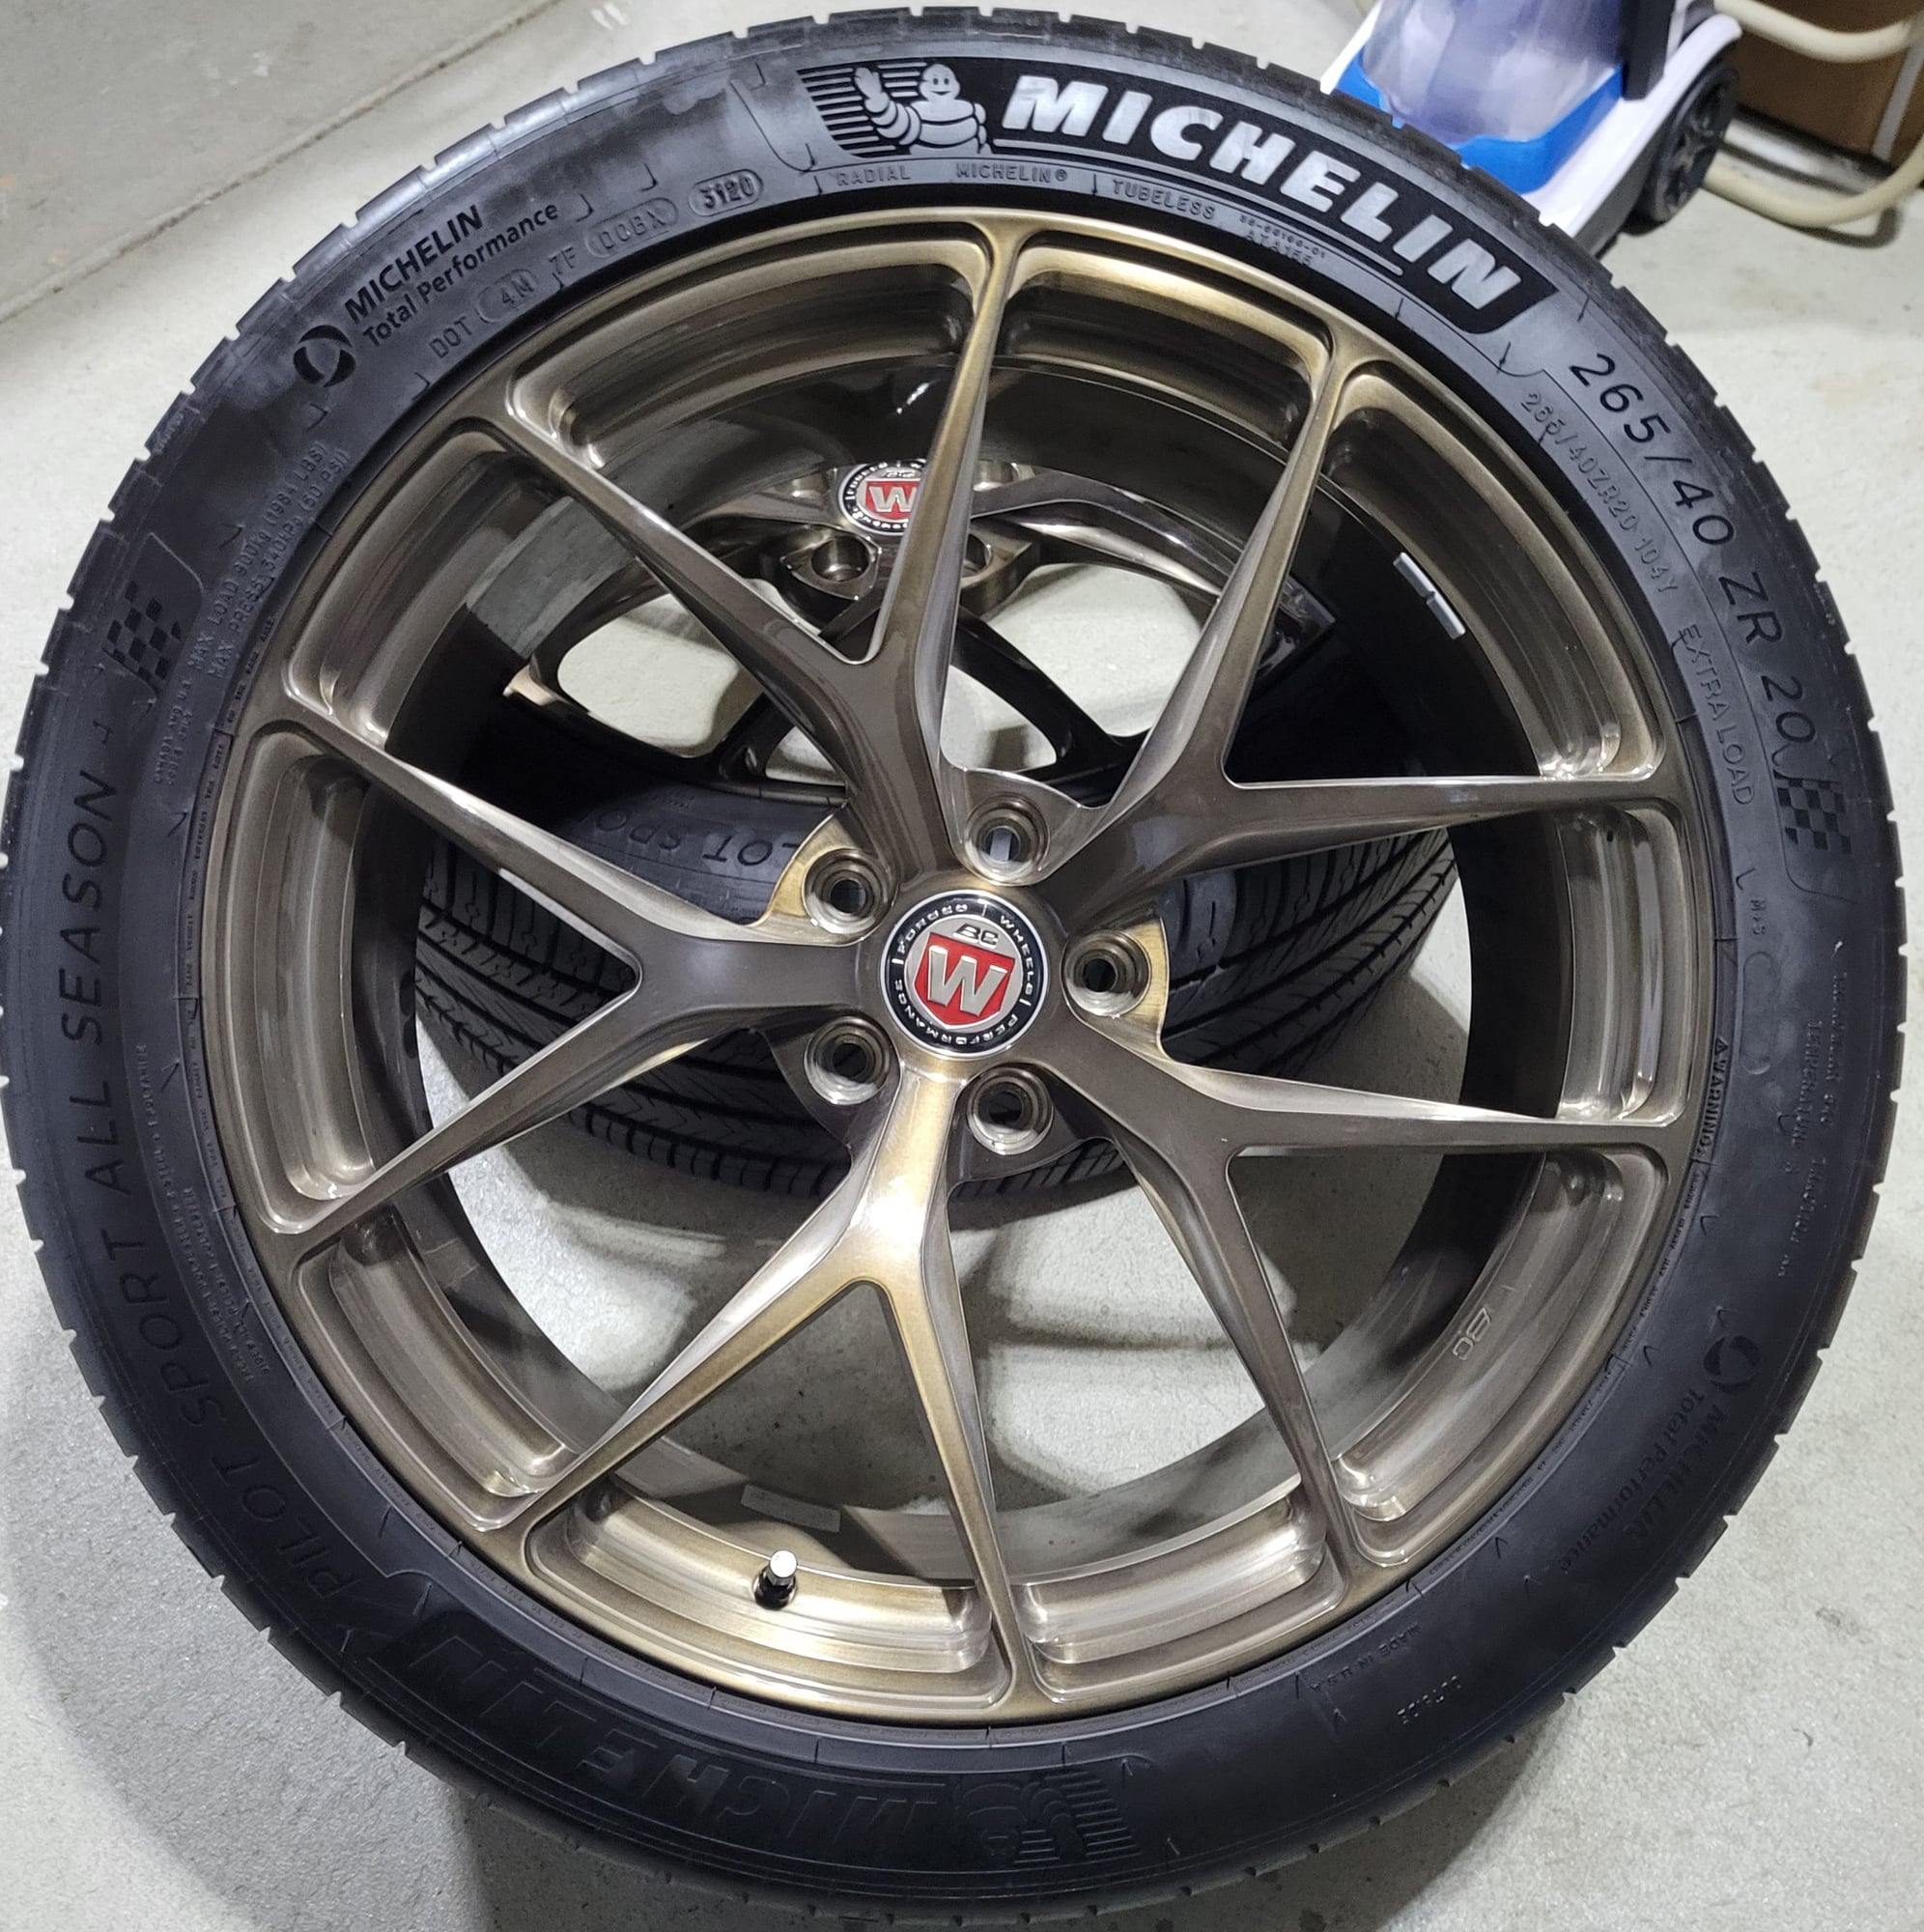 Wheels and Tires/Axles - FS my BC Forged wheels & Michelin tires. - Used - Millville, NJ 8332, United States